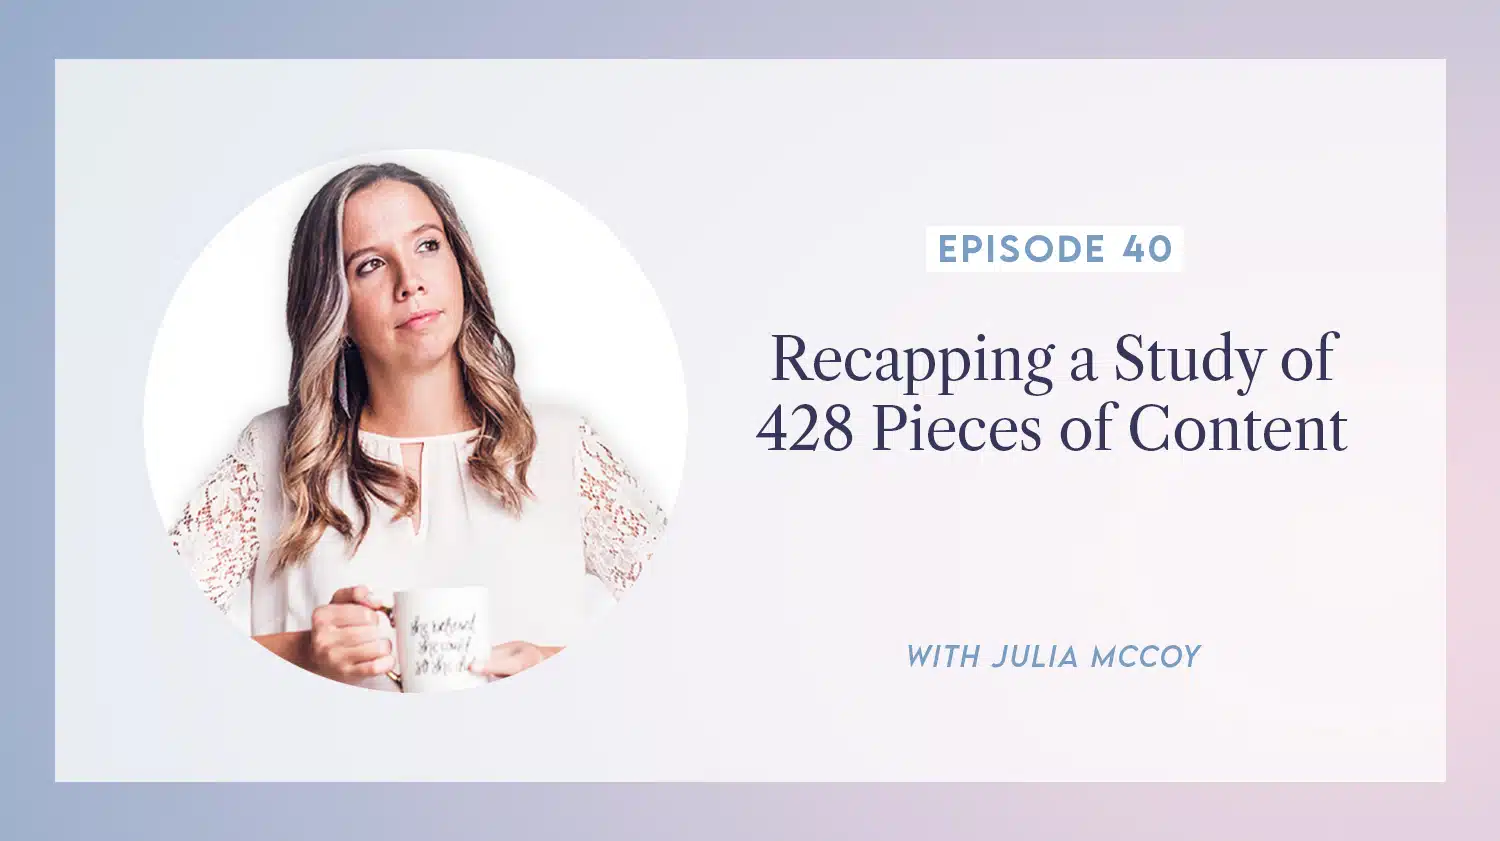 content transformation podcast with julia mccoy episode 40 recapping a study of 428 pieces of content